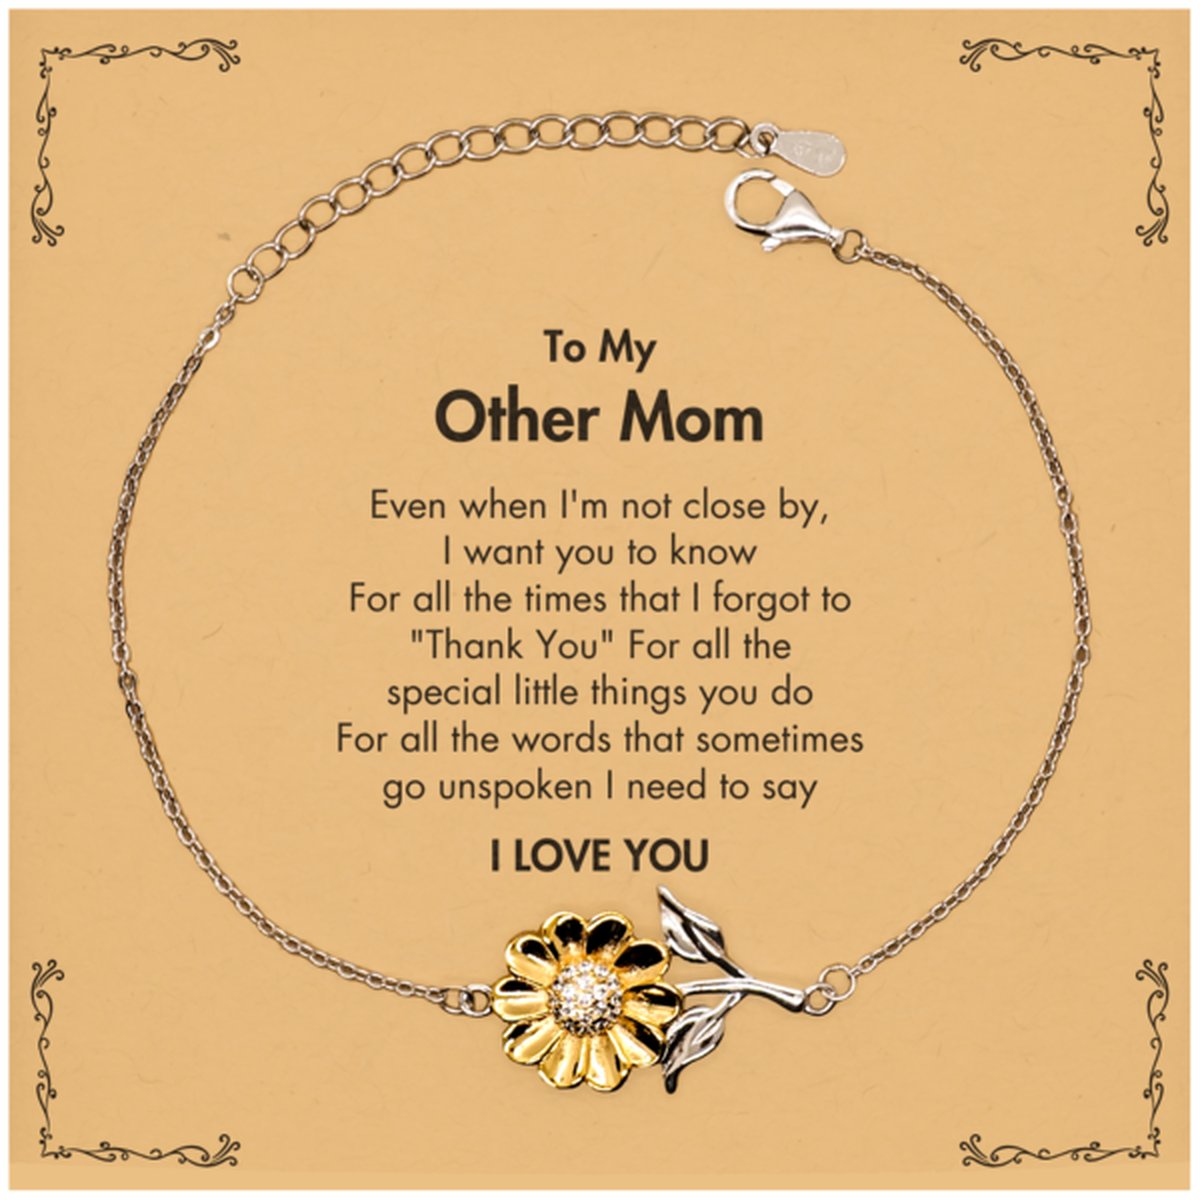 Thank You Gifts for Other Mom, Keepsake Sunflower Bracelet Gifts for Other Mom Birthday Mother's day Father's Day Other Mom For all the words That sometimes go unspoken I need to say I LOVE YOU